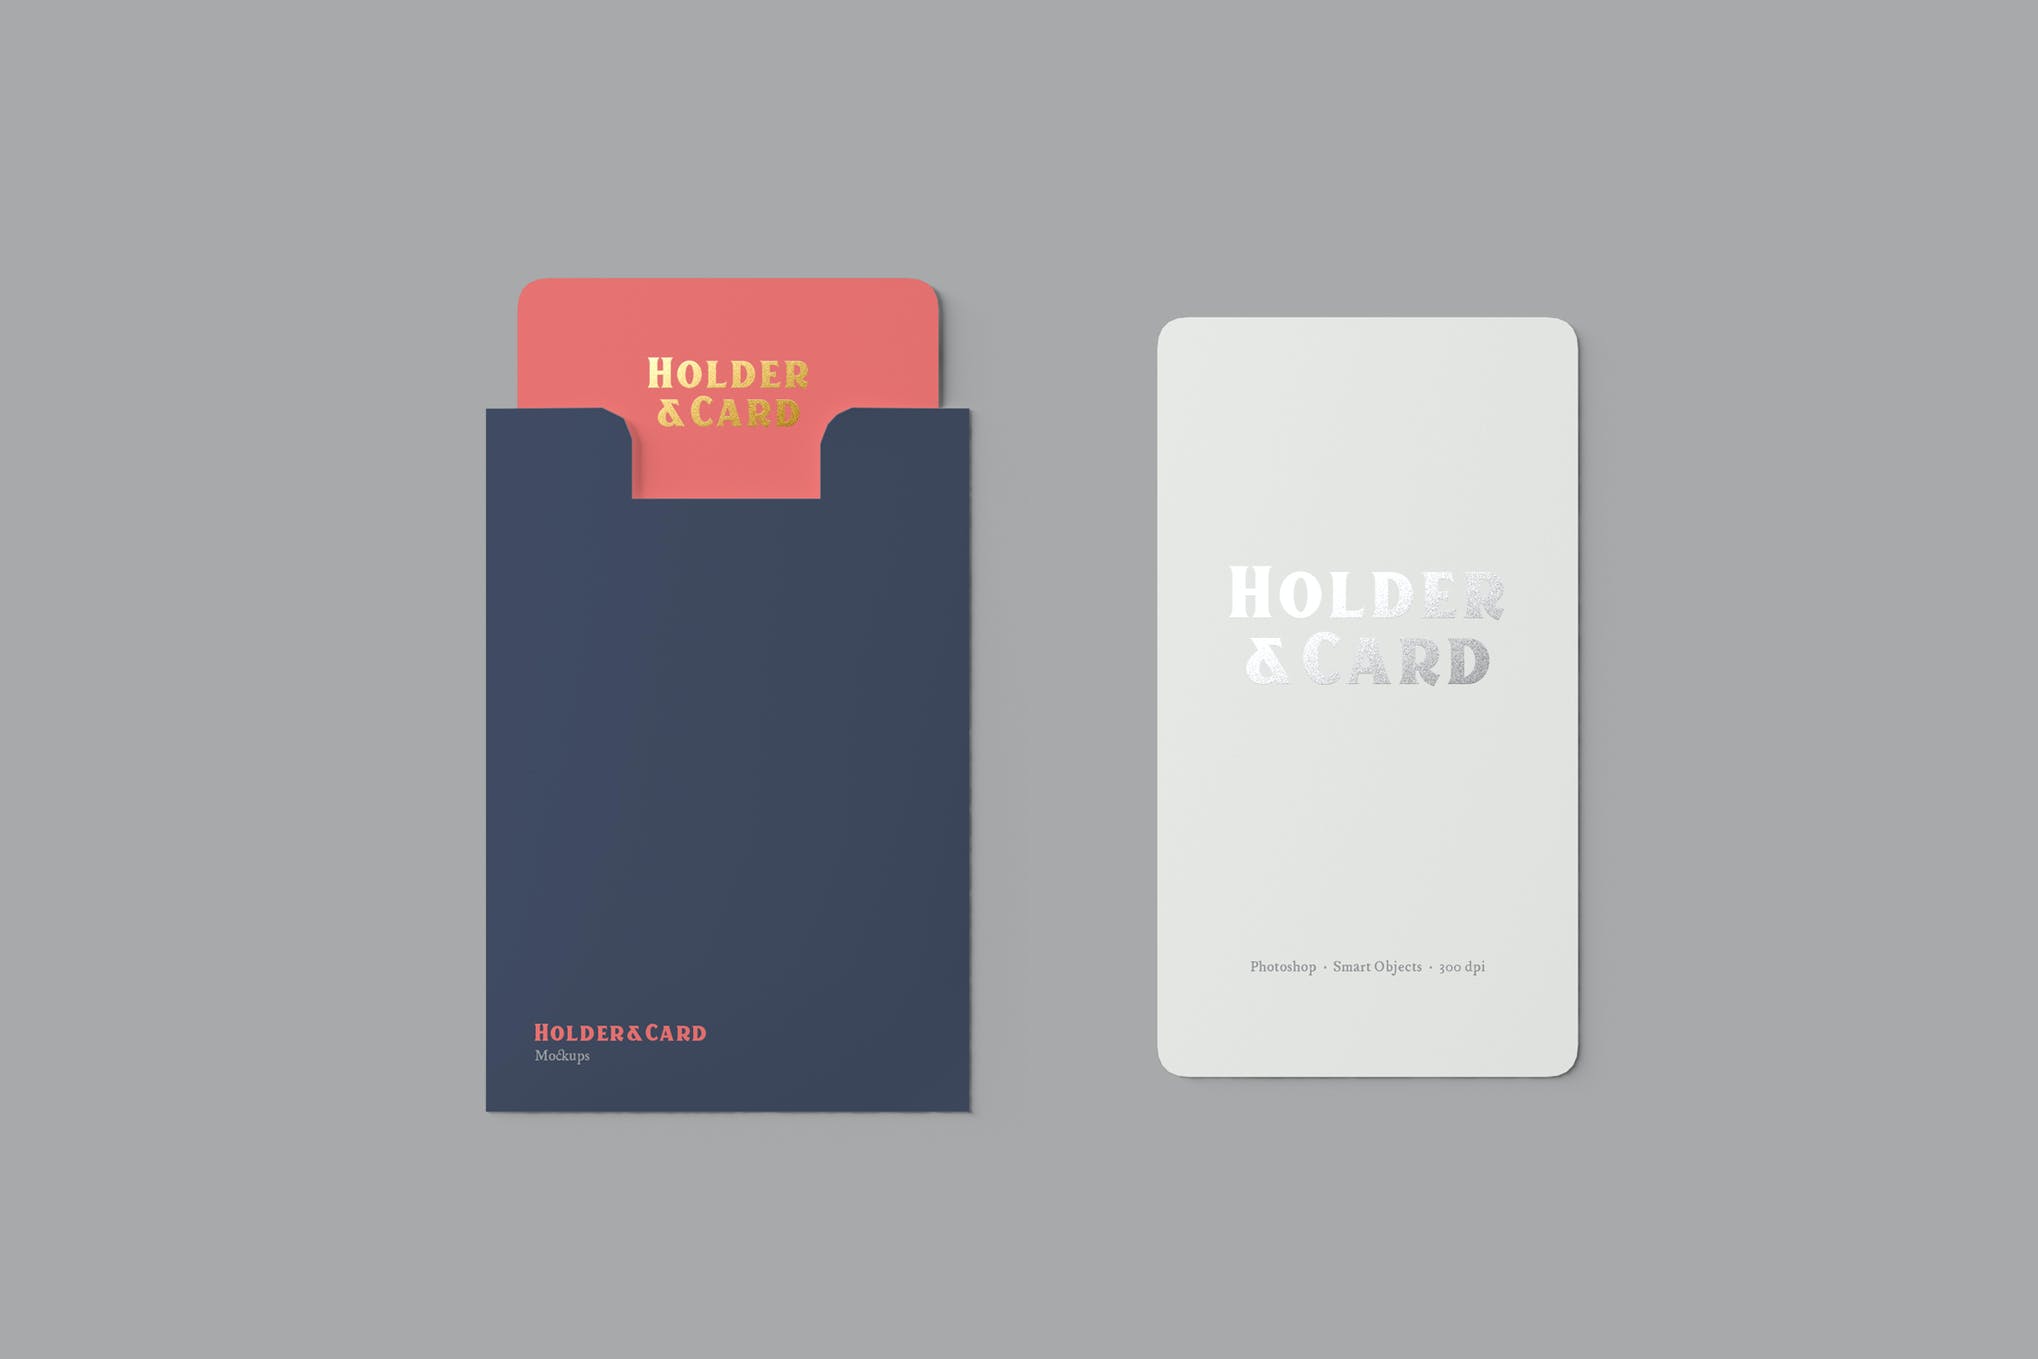 A holder and card mockup templates